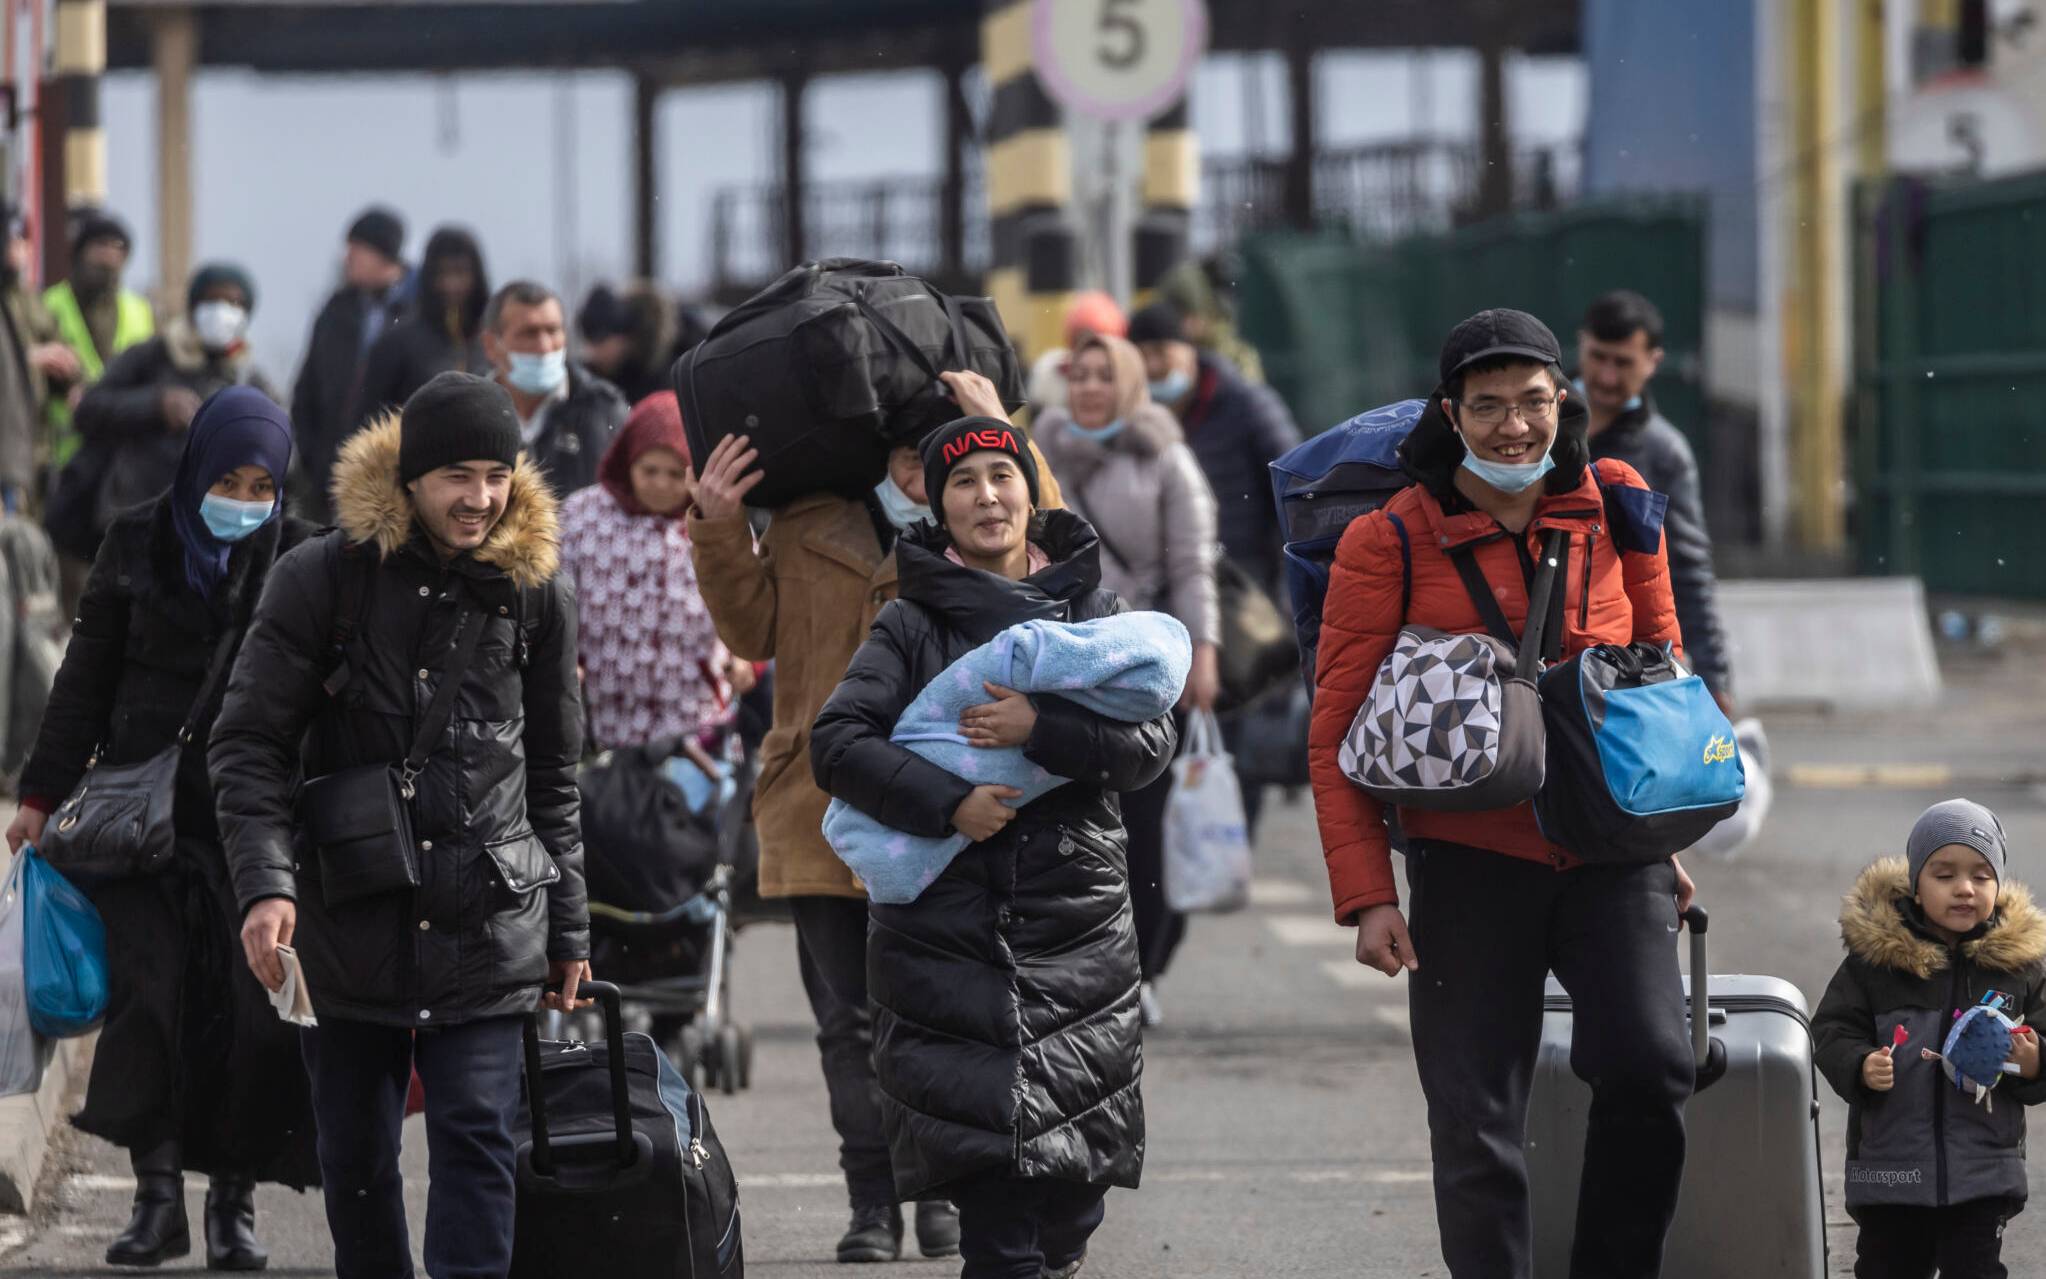 Refugees from Ukraine are seen as they arrive at the border crossing in Korczowa, Poland, March 2, 2022. - The number of refugees fleeing the conflict in Ukraine has surged to nearly 836,000, United Nations figures showed on March 2, 2022, as fighting intensified on day seven of Russia's invasion. (Photo by Wojtek RADWANSKI / AFP)